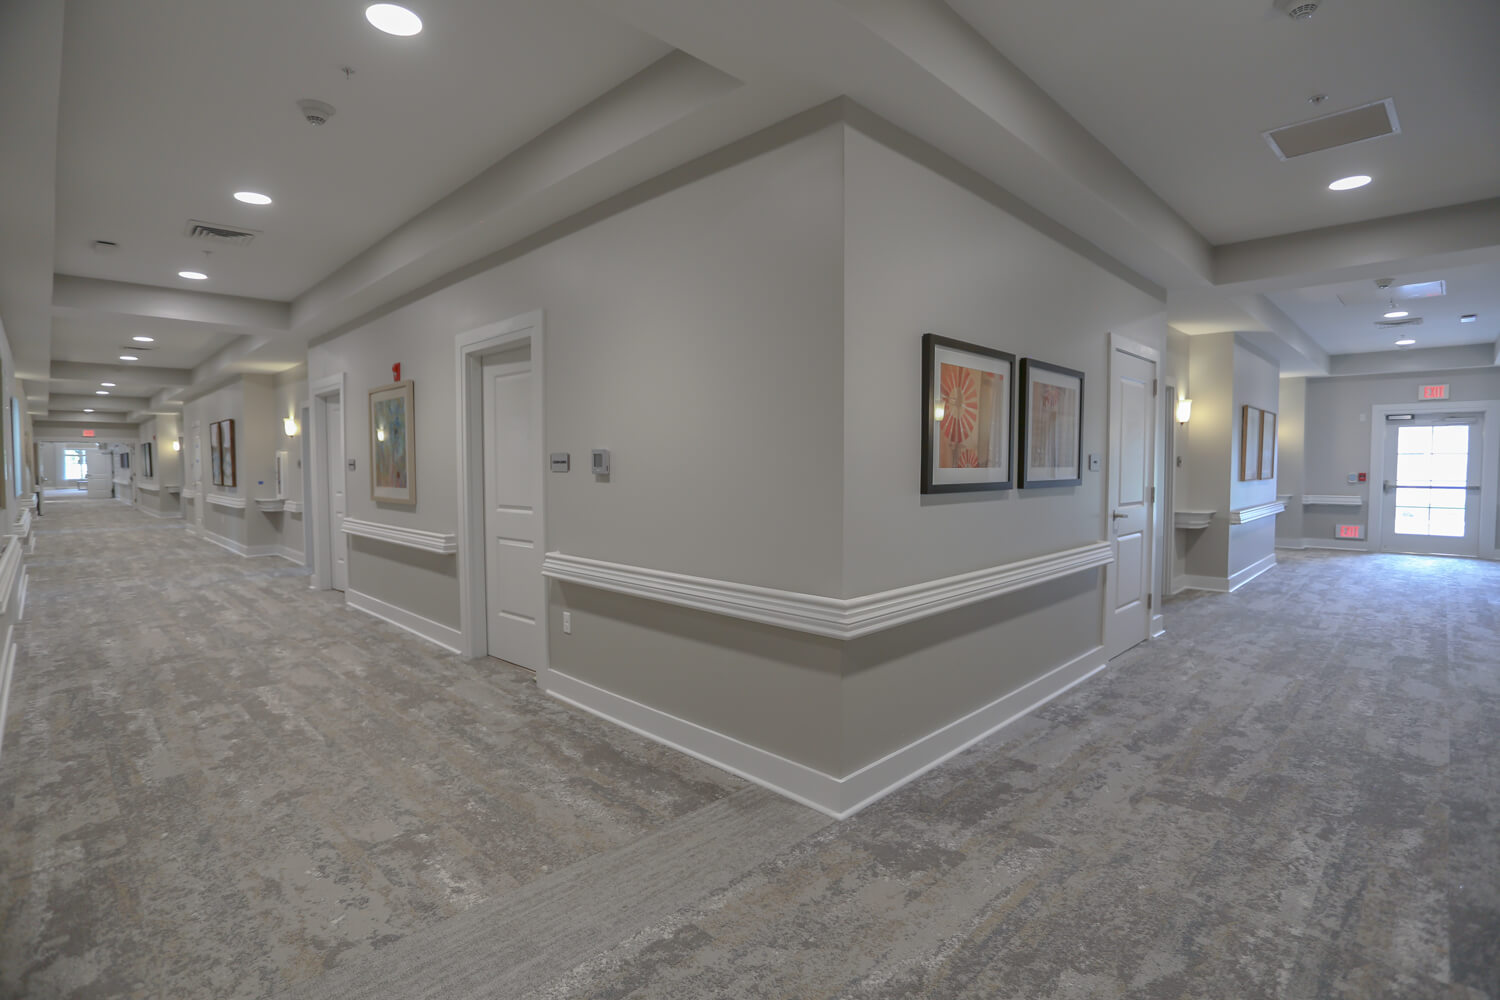 Grand South Senior Living - Hallway - Designed by Foshee Architecture